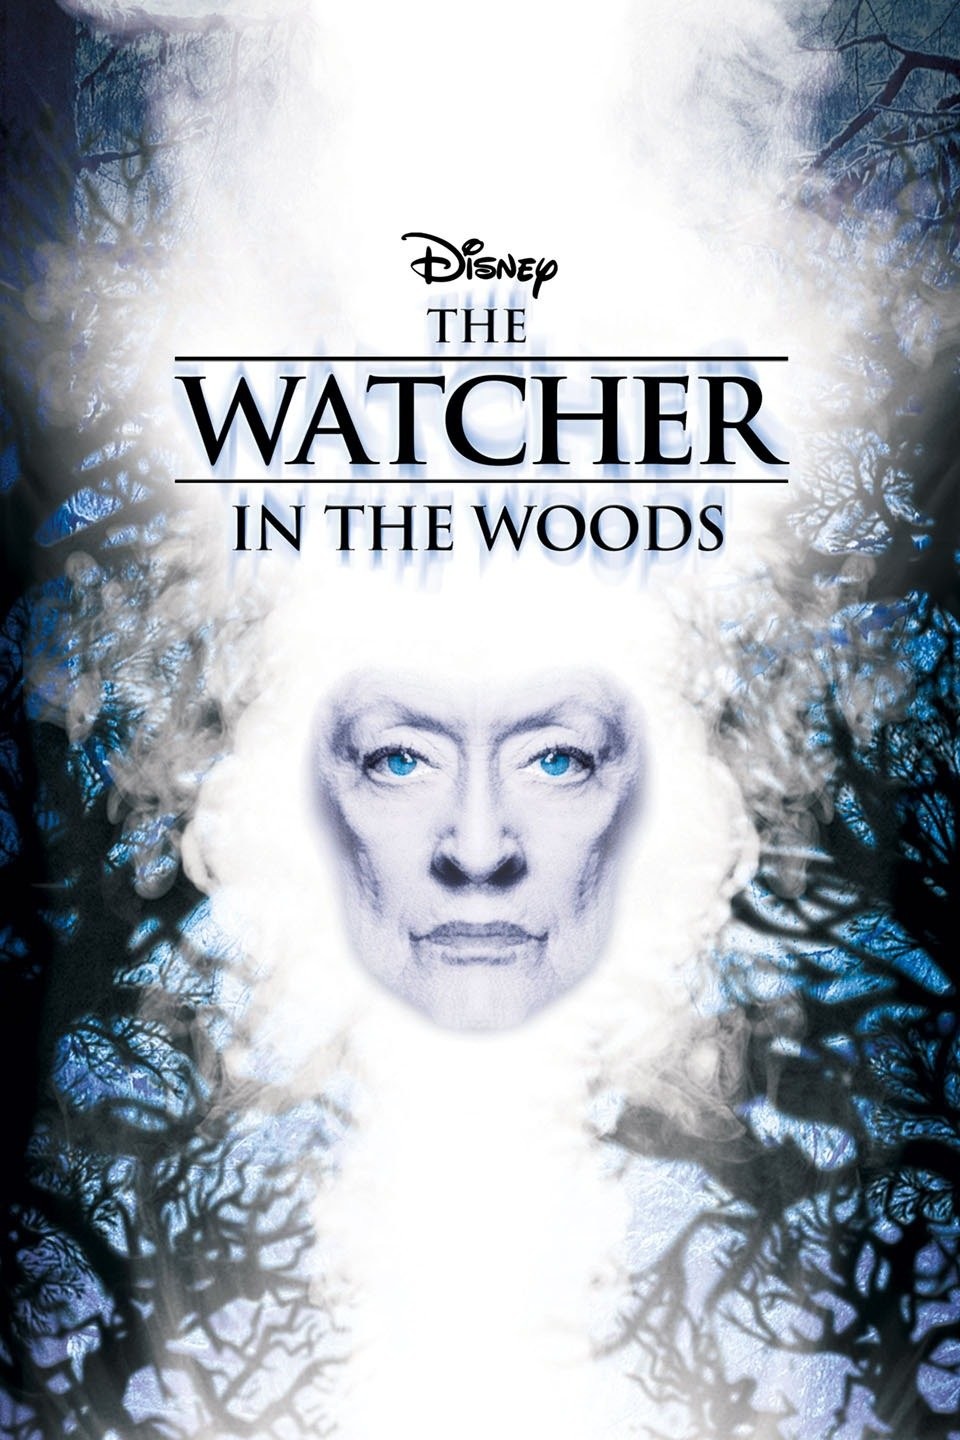  The Watcher in the Woods : Movies & TV